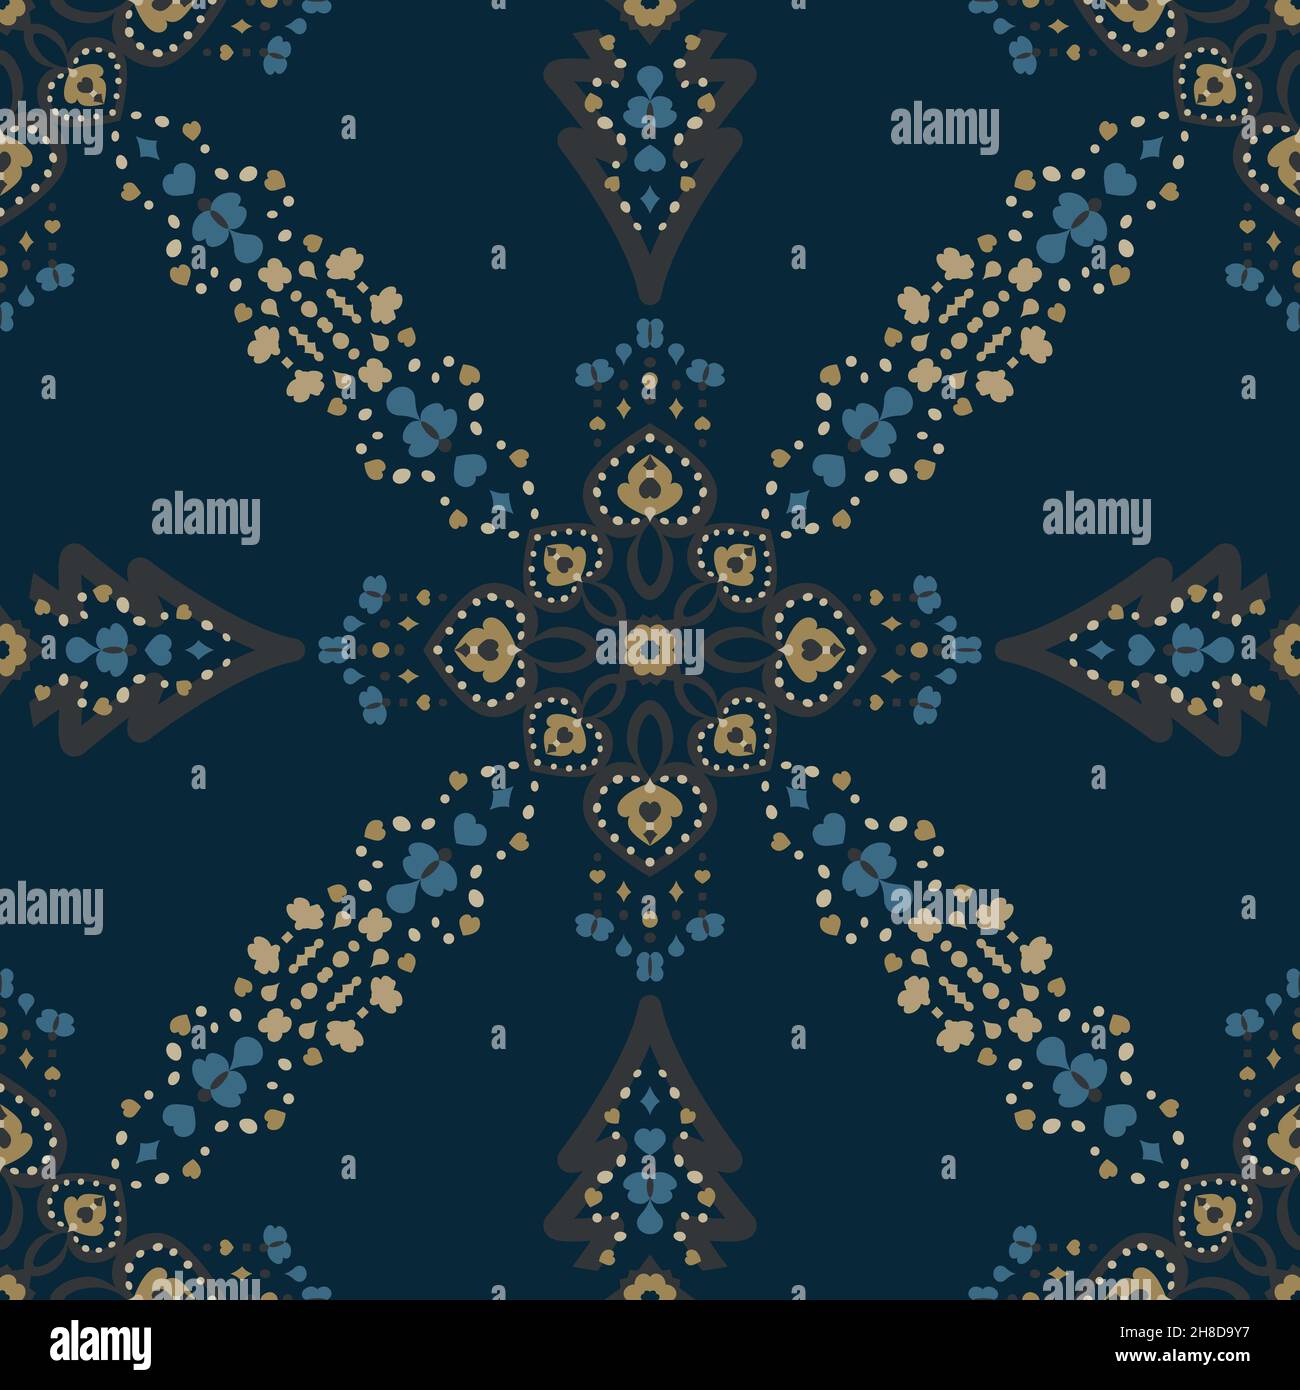 Seamless pattern. Christmas theme with christmas trees, hearts and butterflies. Colors blue, grey and golden yellow. Stock Photo